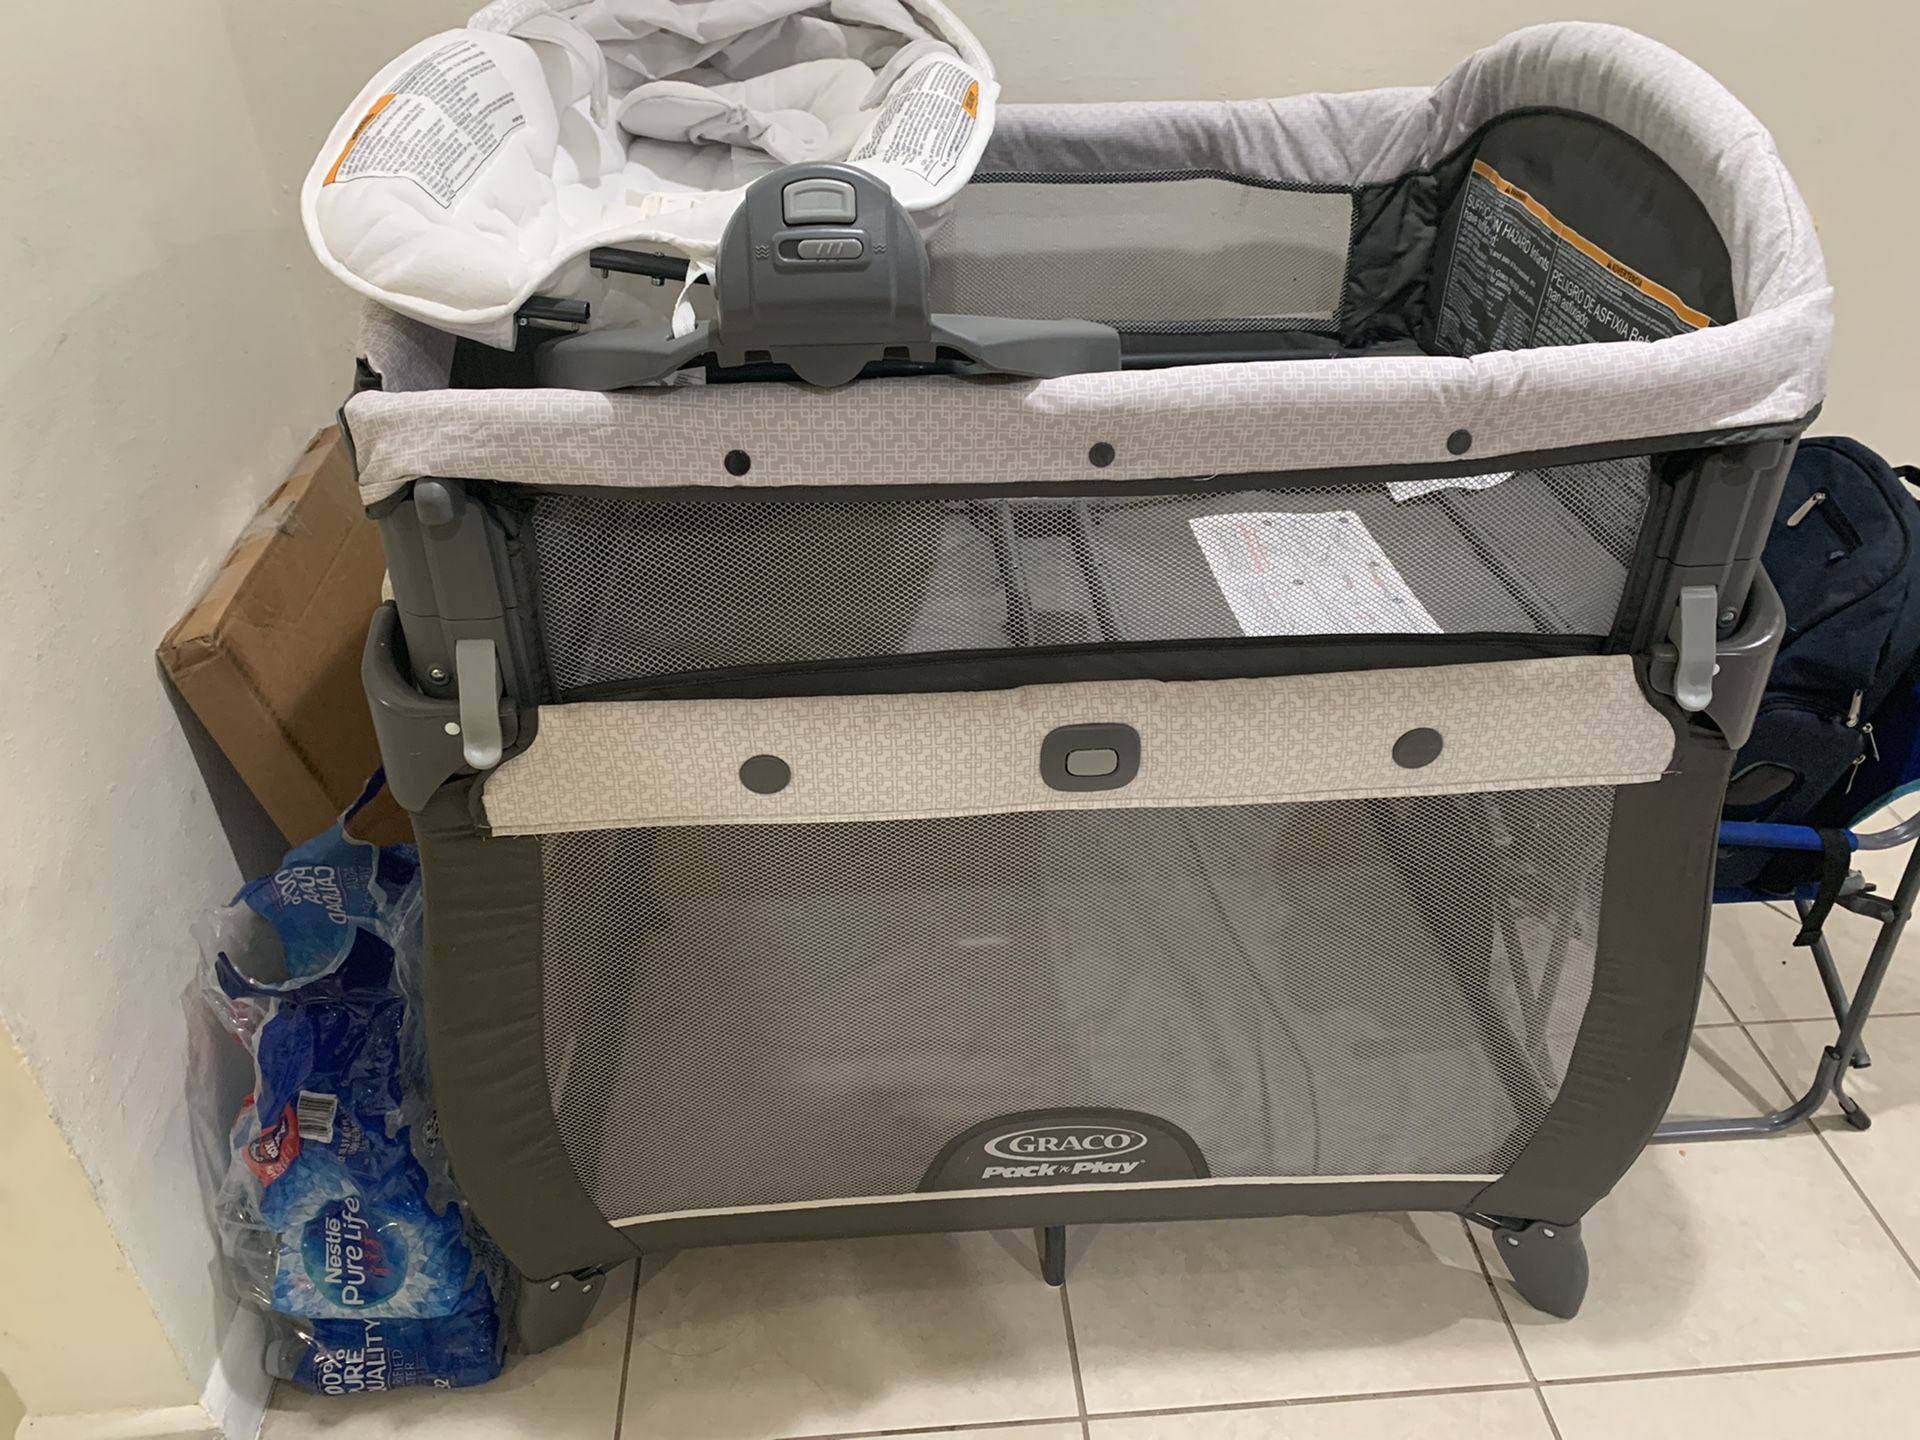 Graco pack n play newborn to toddler